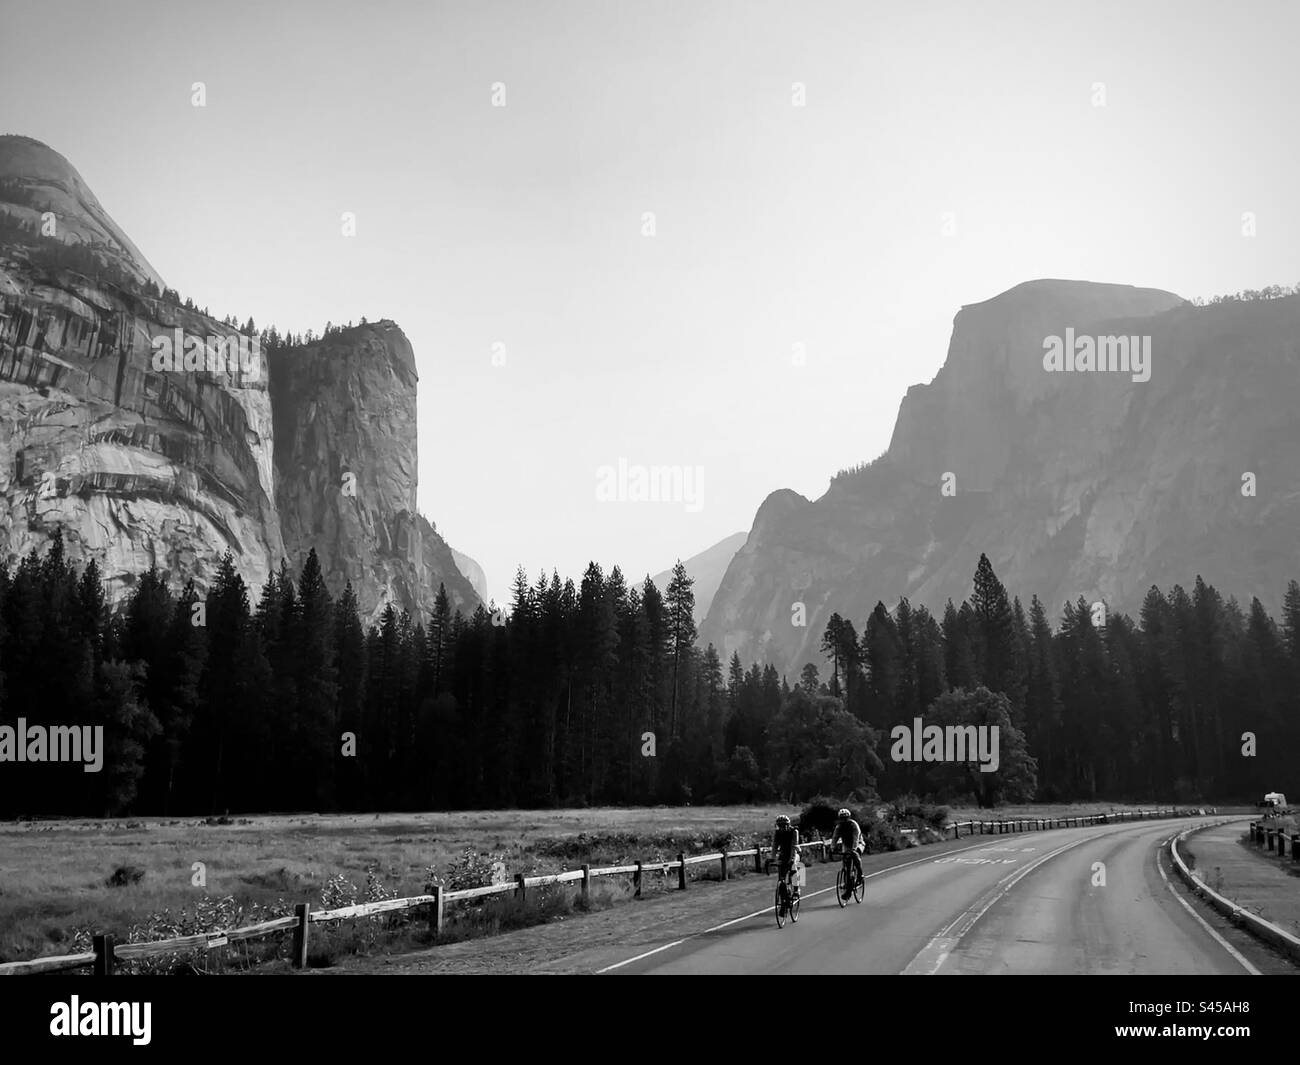 Two cyclists riding in the lower Yosemite Valley with beautiful views of Half Dome. Yosemite National Park, California USA. Stock Photo